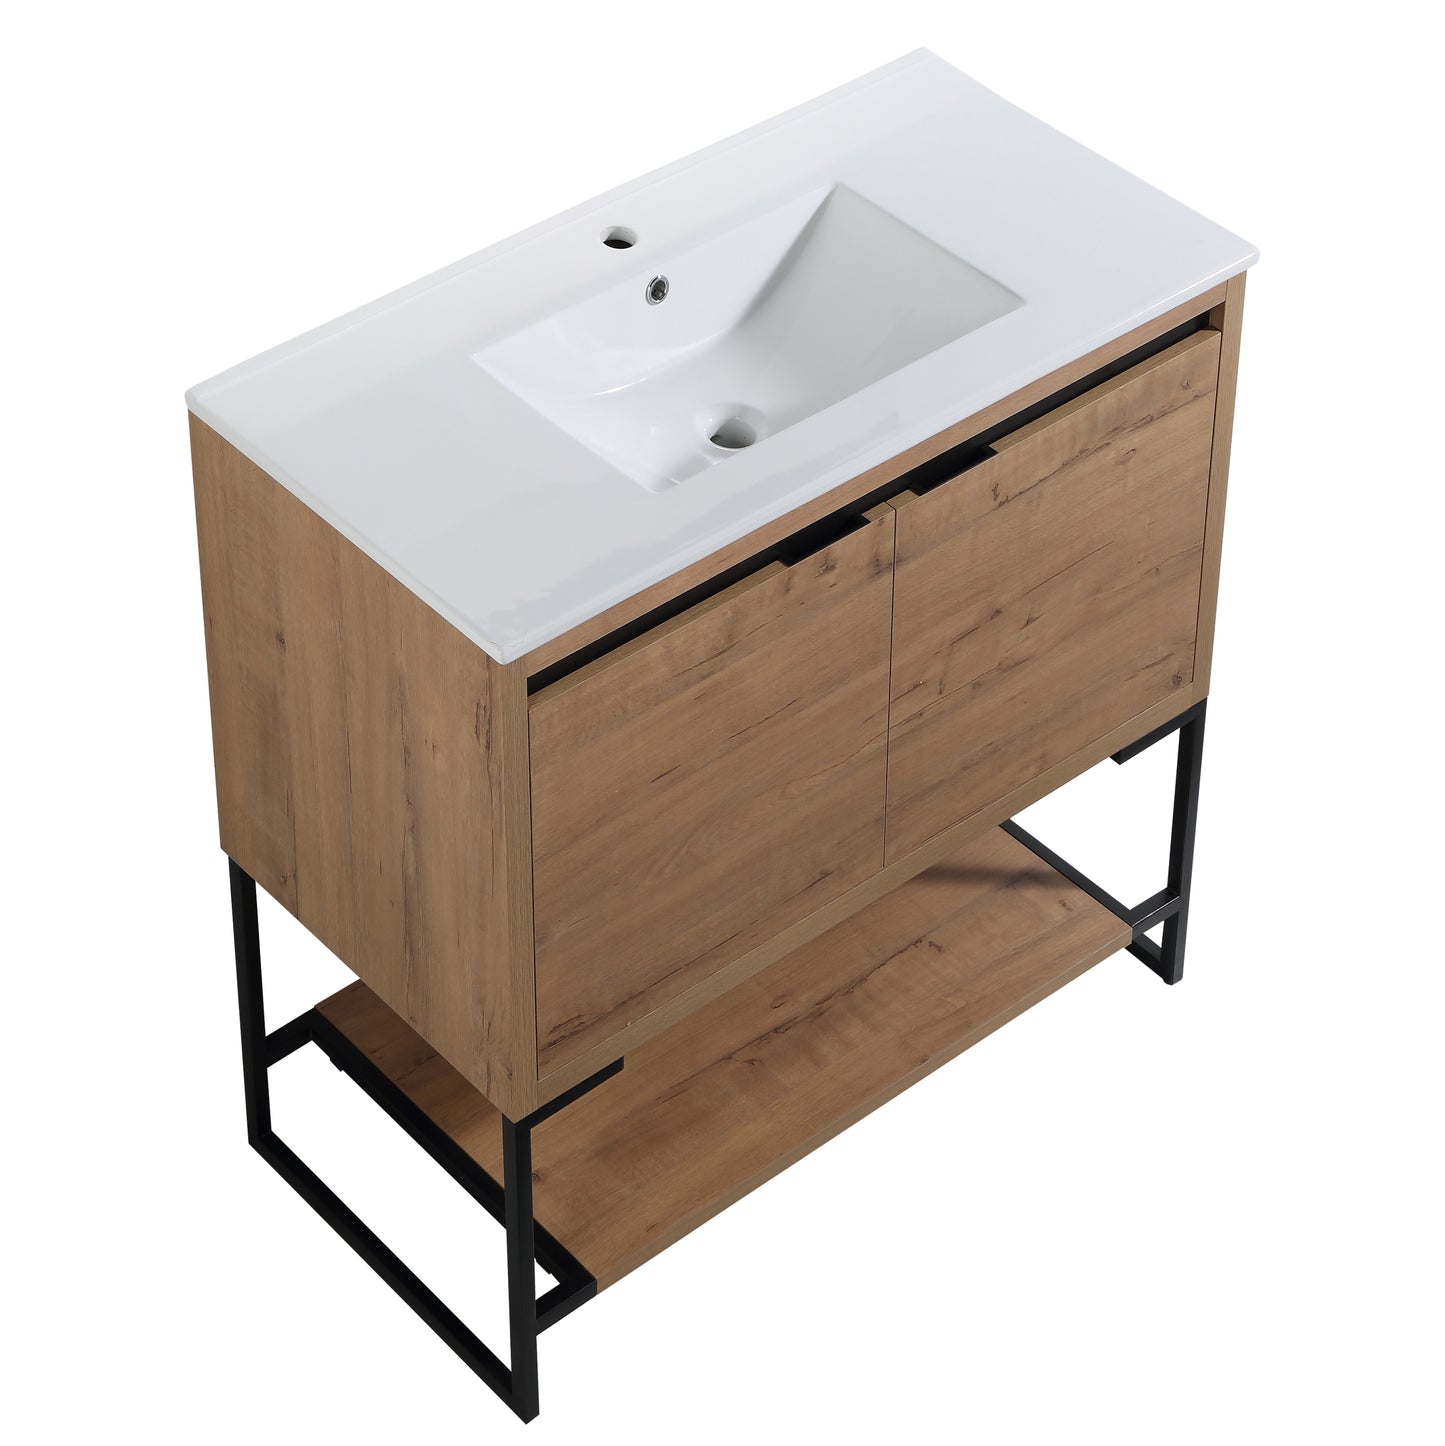 36" Freestanding Bathroom Vanity With Two Soft Closing Doors And One Shelf